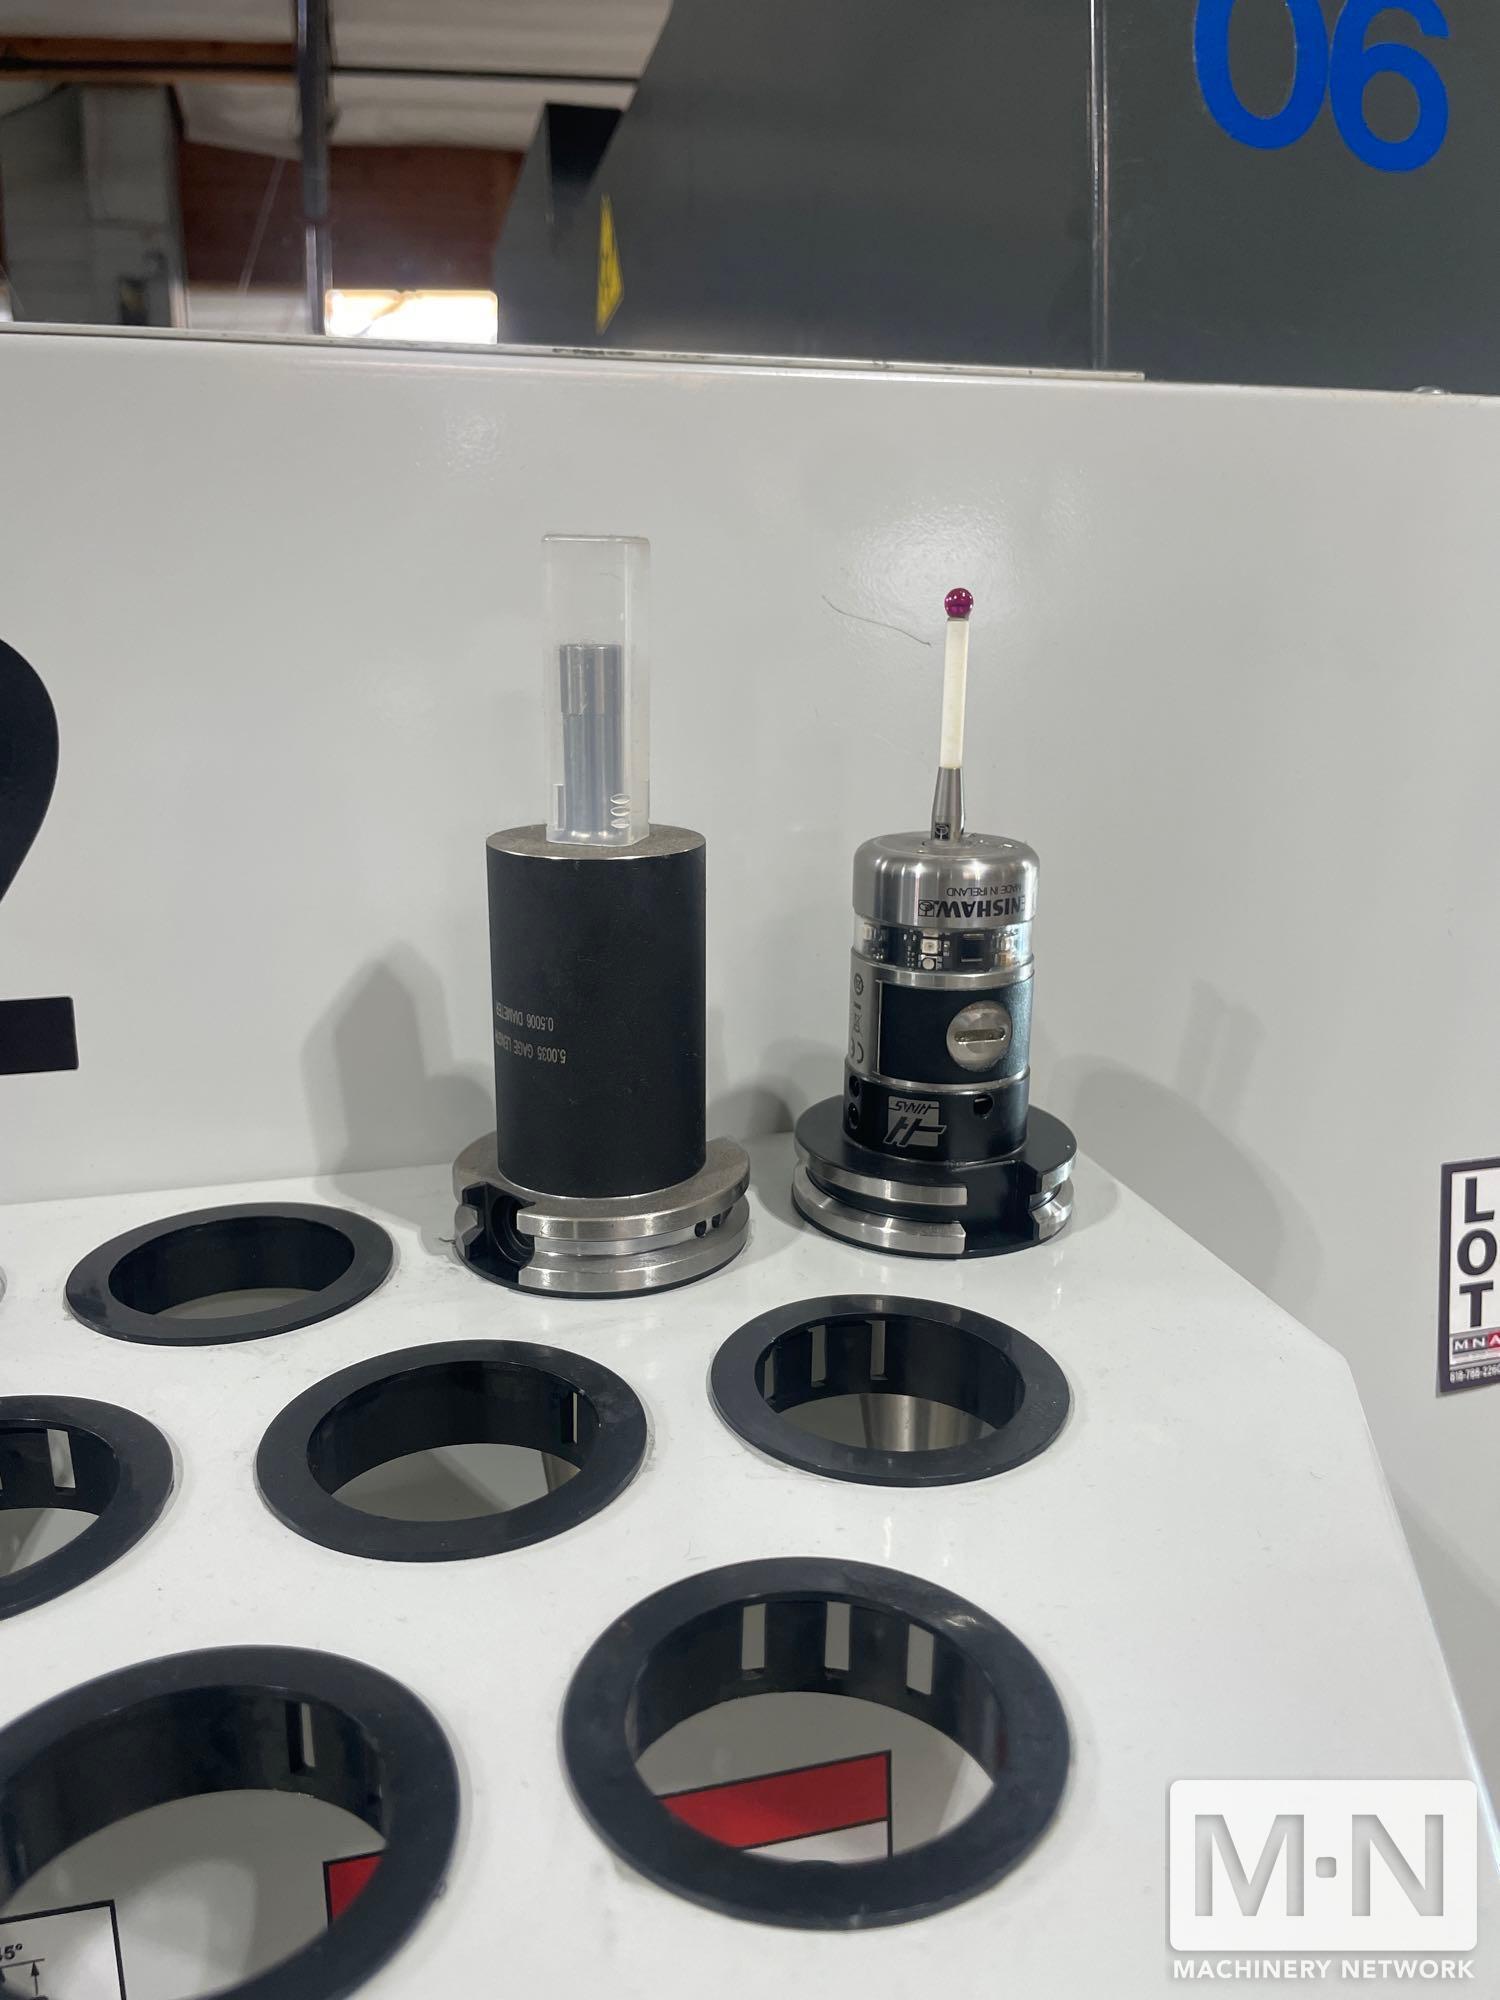 2021 HAAS DM-2 MACHINING CENTERS, VERTICAL, N/C & CNC, (Multiple Spindle) | Machinery Network Inc.